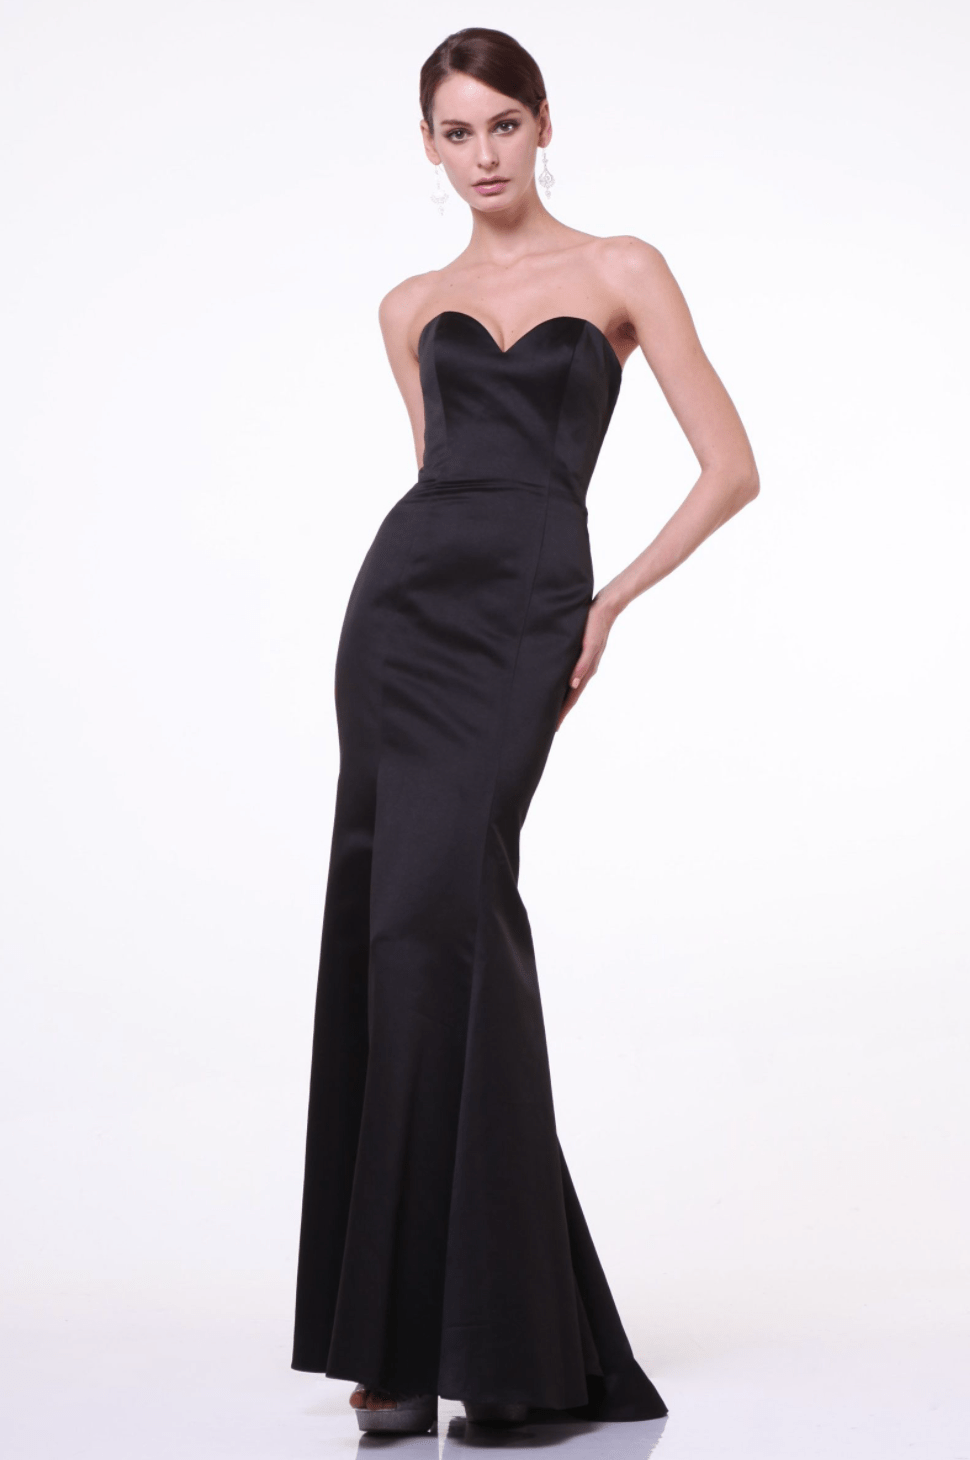 Strapless Satin Mermaid Dress by Ladivine - NORMA REED